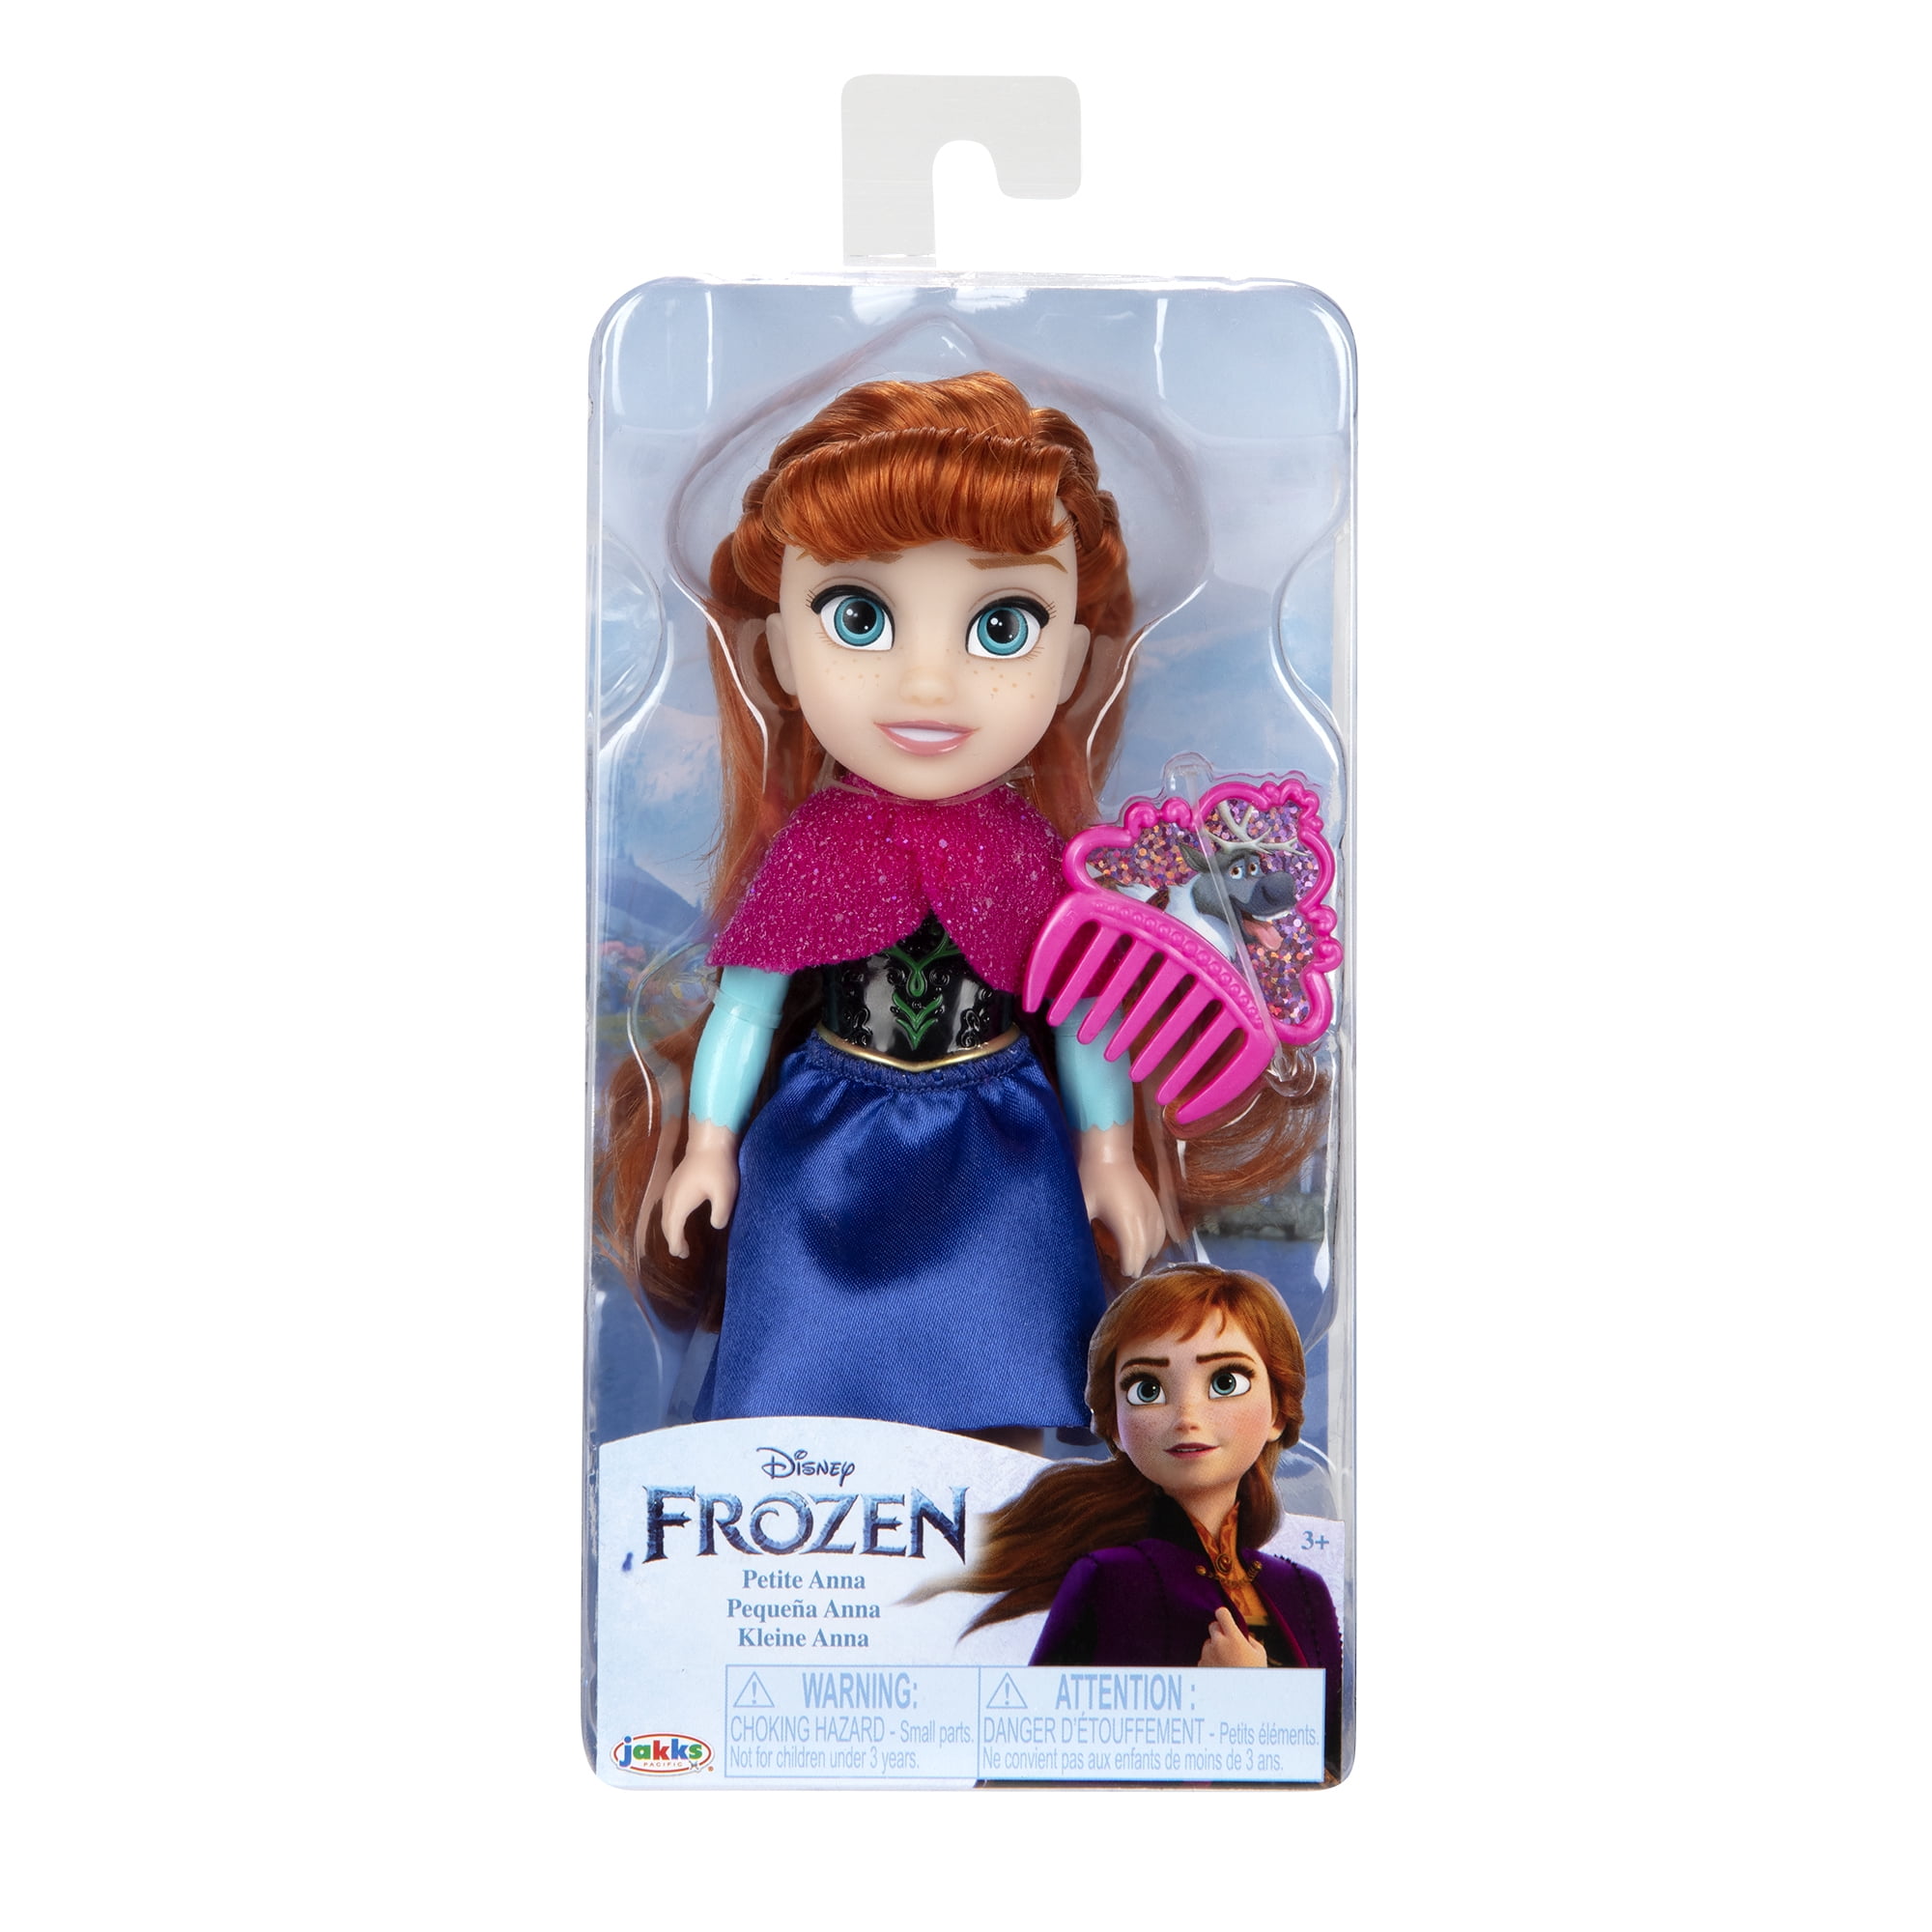 Pair Of Shoes & Comb Gift For Kid's Disney Frozen Petite Anna Doll With Outfit 